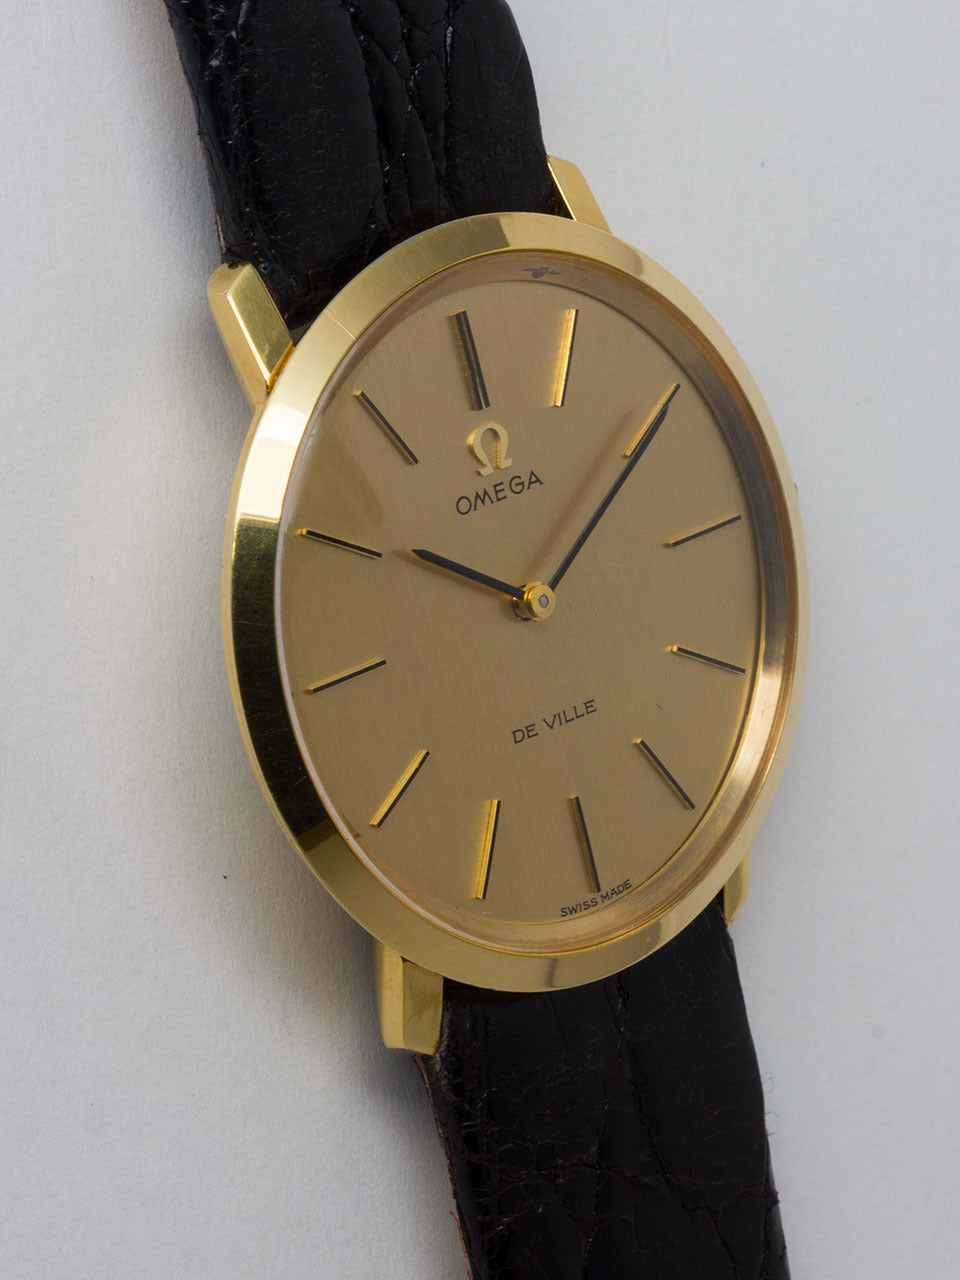 Omega Yellow Gold Filled De Ville Wristwatch ref 111.077 circa 1970. 33 x 35 gold filled top and stainless steel back thin dress model. Very pleasing classic dress model with original champagne dial with thin gold sticks and black painted thin baton